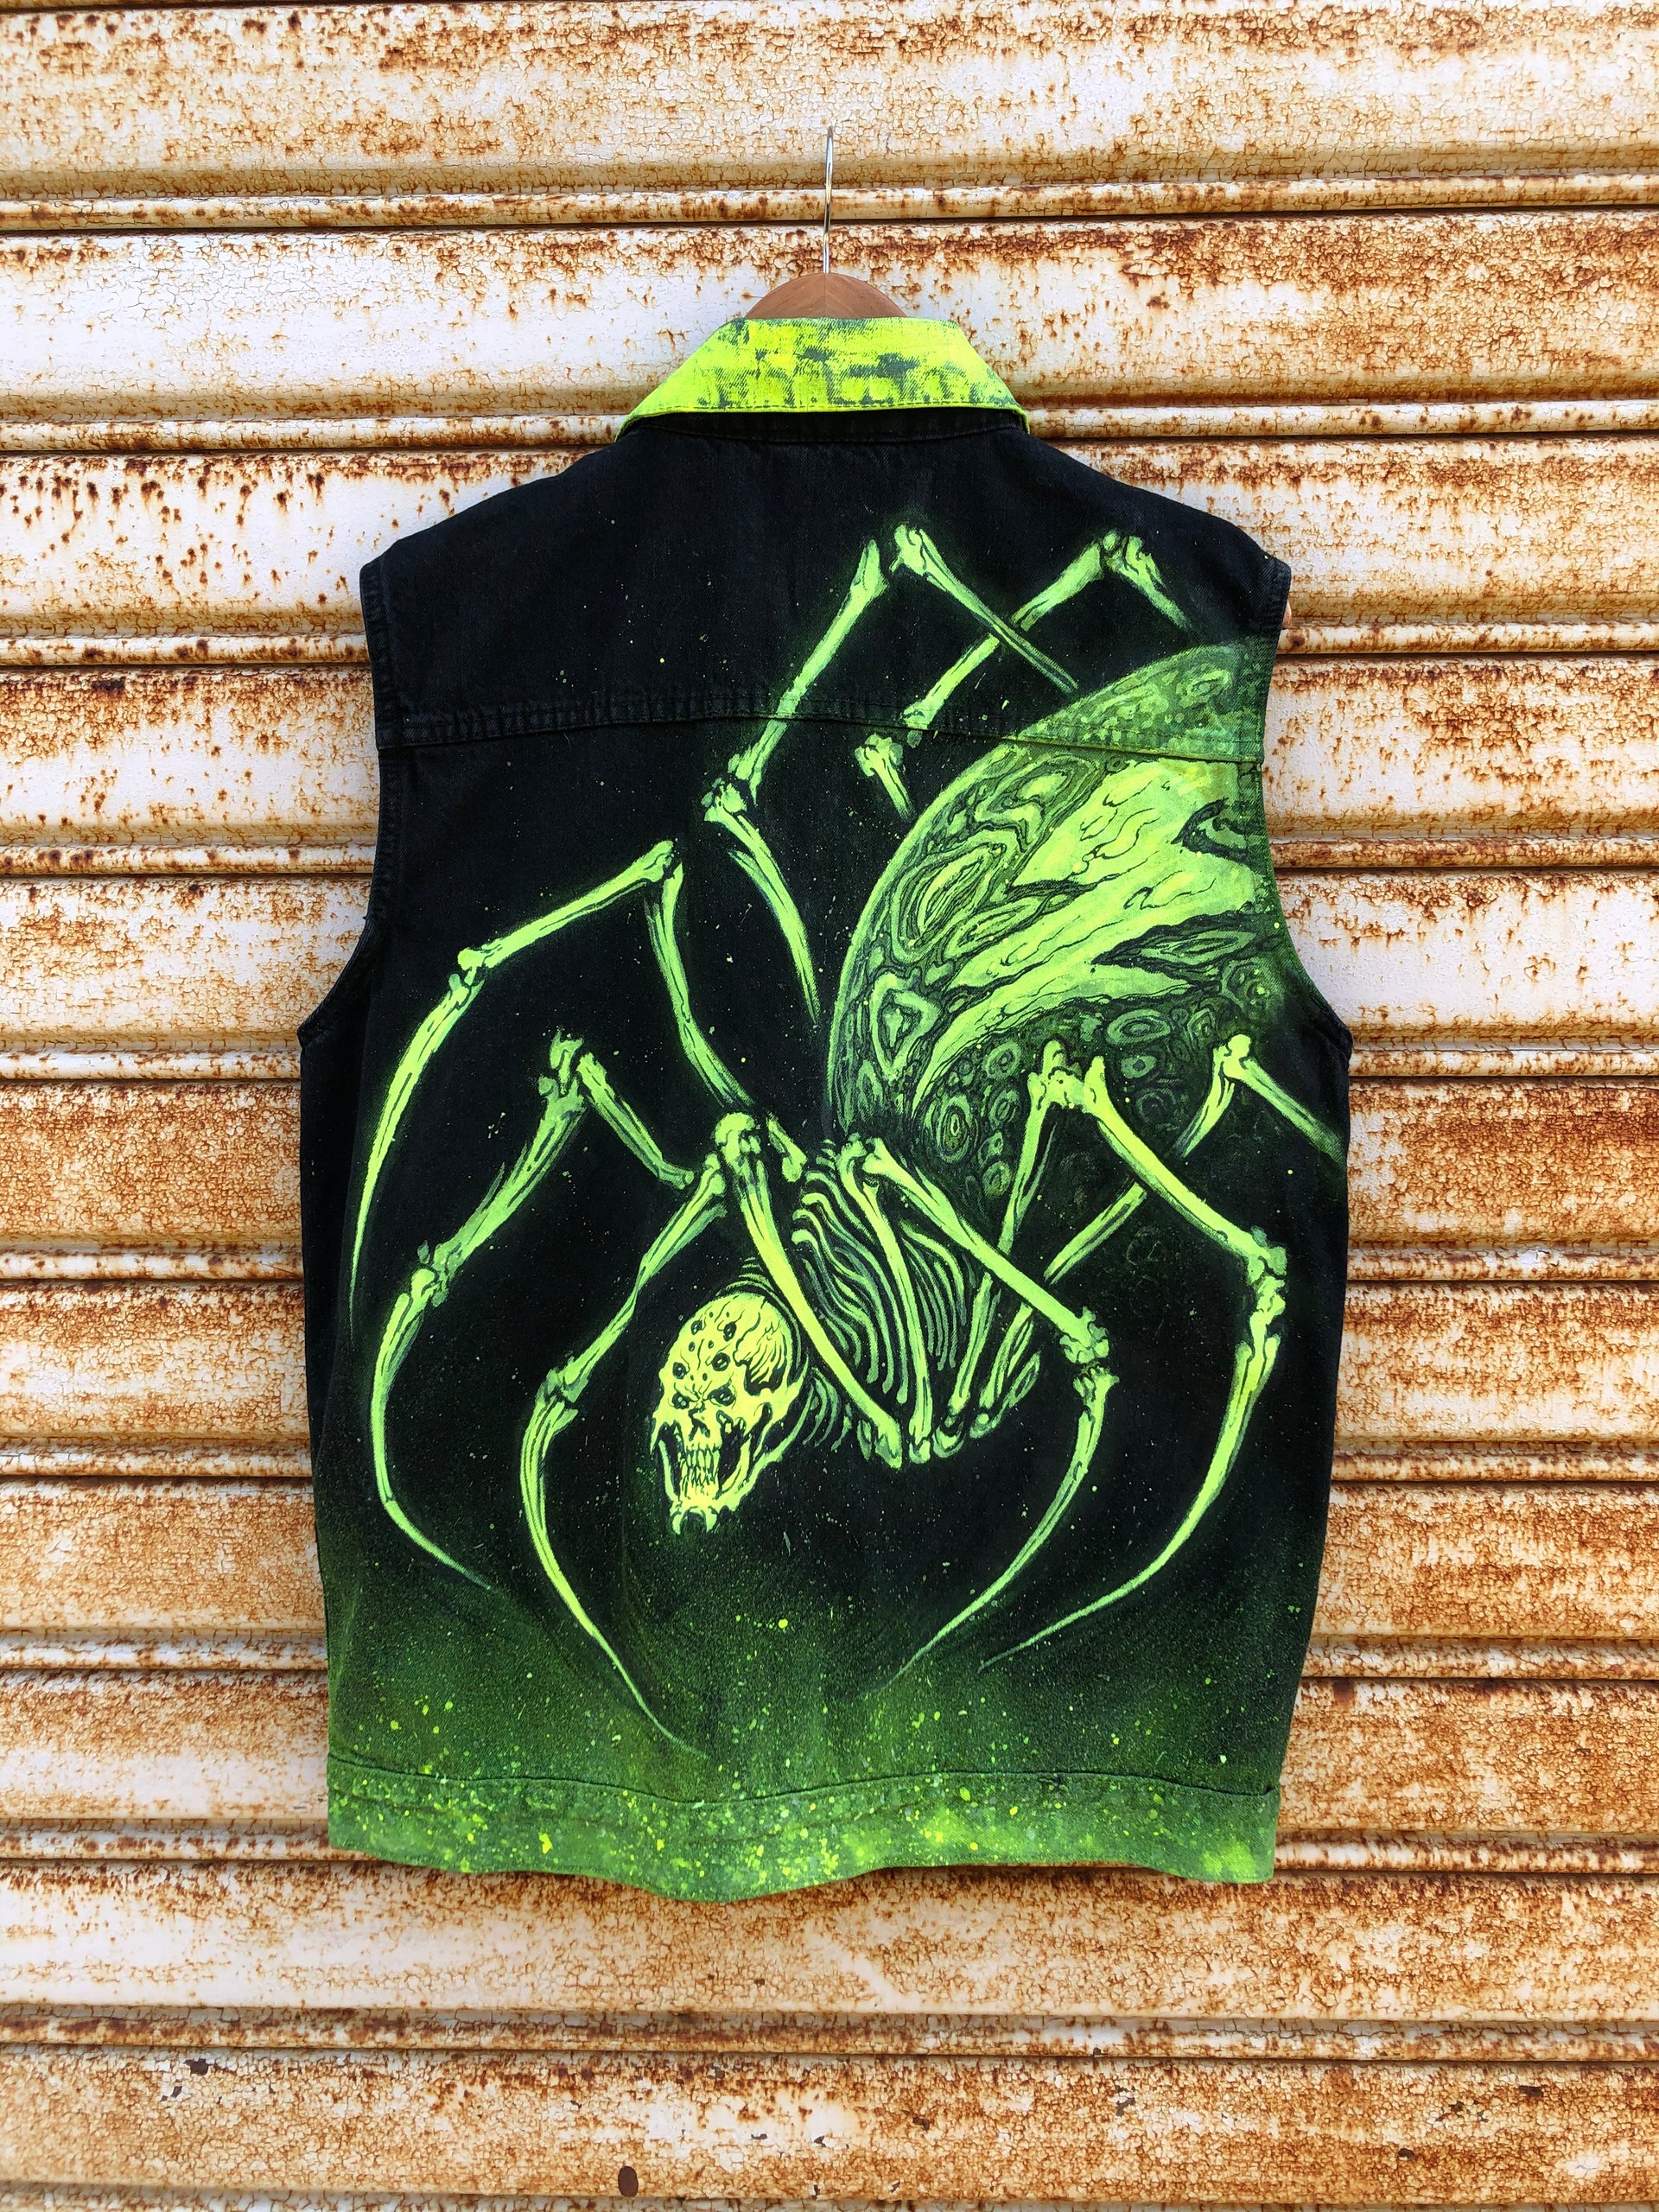 ONE PEACE "SPIDER FLUO" LIMITED EDITION DENIM VEST